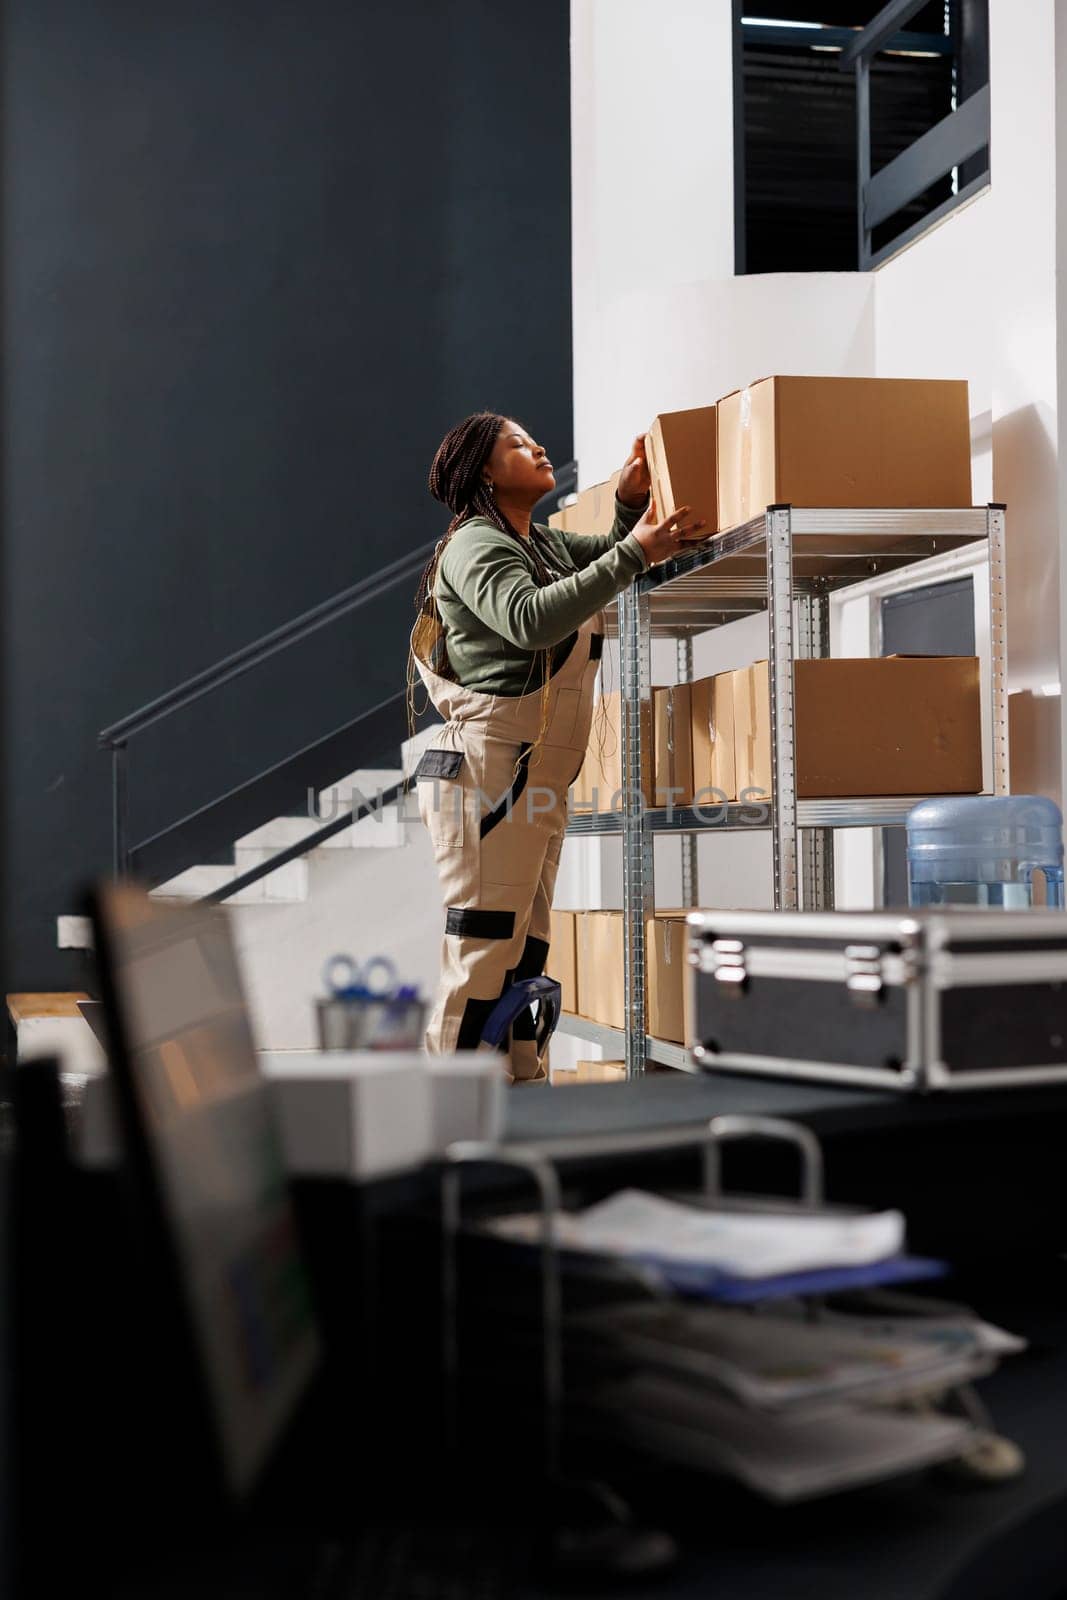 Warehouse employee taking out cardboard box from metallic shelf, working at customers orders in storage room. Stockroom worker preparing packages for delivery during storehouse inventory